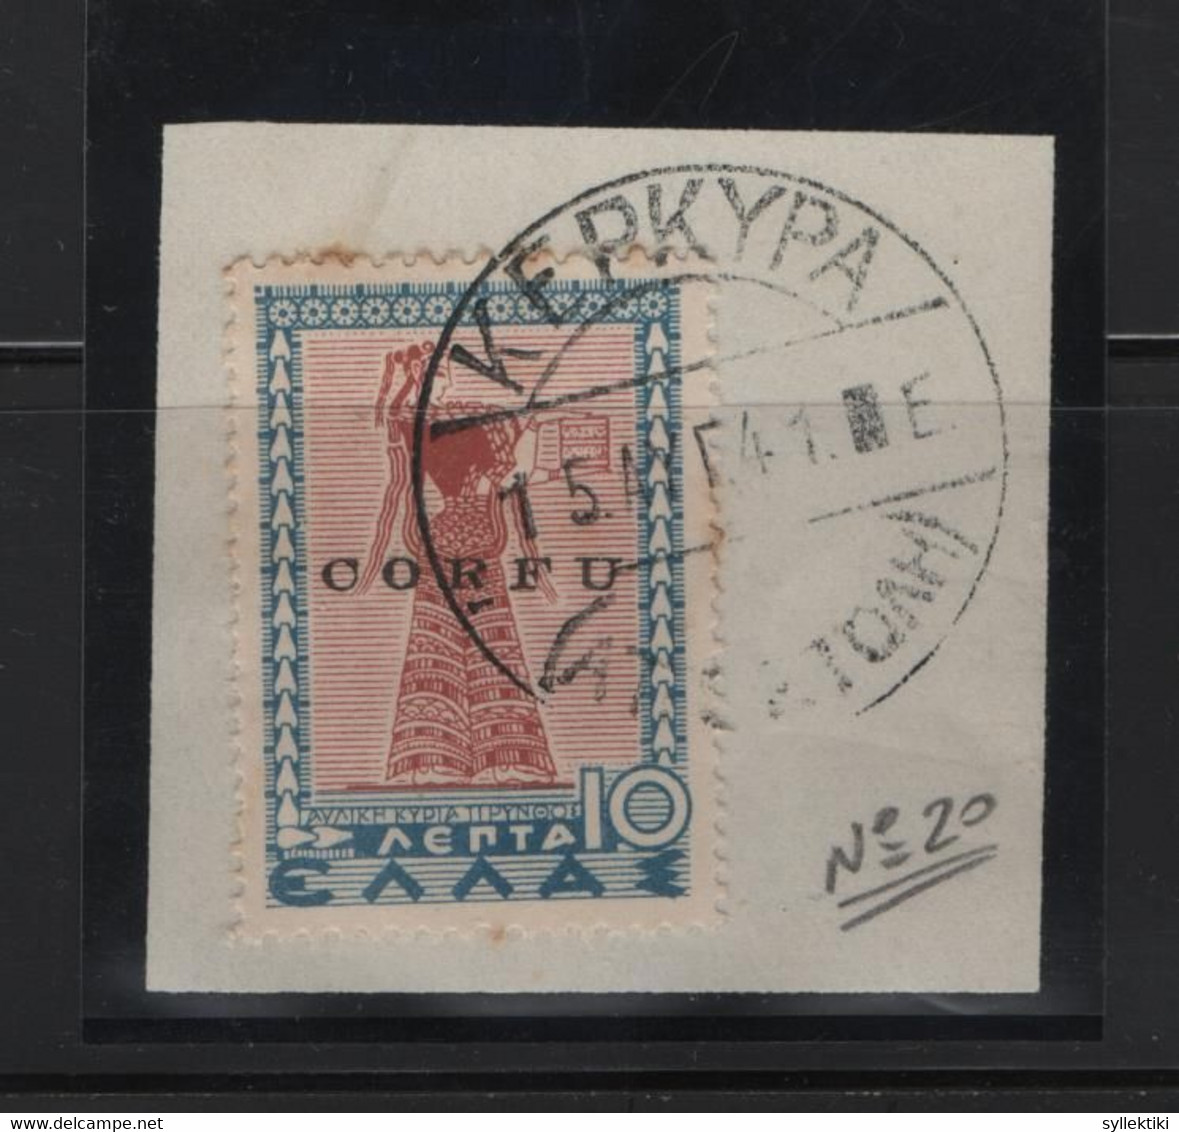 GREECE CORFU 1941 10 LEPTA ΤΙΡΥΝΘΑ USED STAMP ON PIECE  THE STAMP IS GENUINE AS, THE POSTMARK COVERS ON ONE POINT THE OV - Ionian Islands